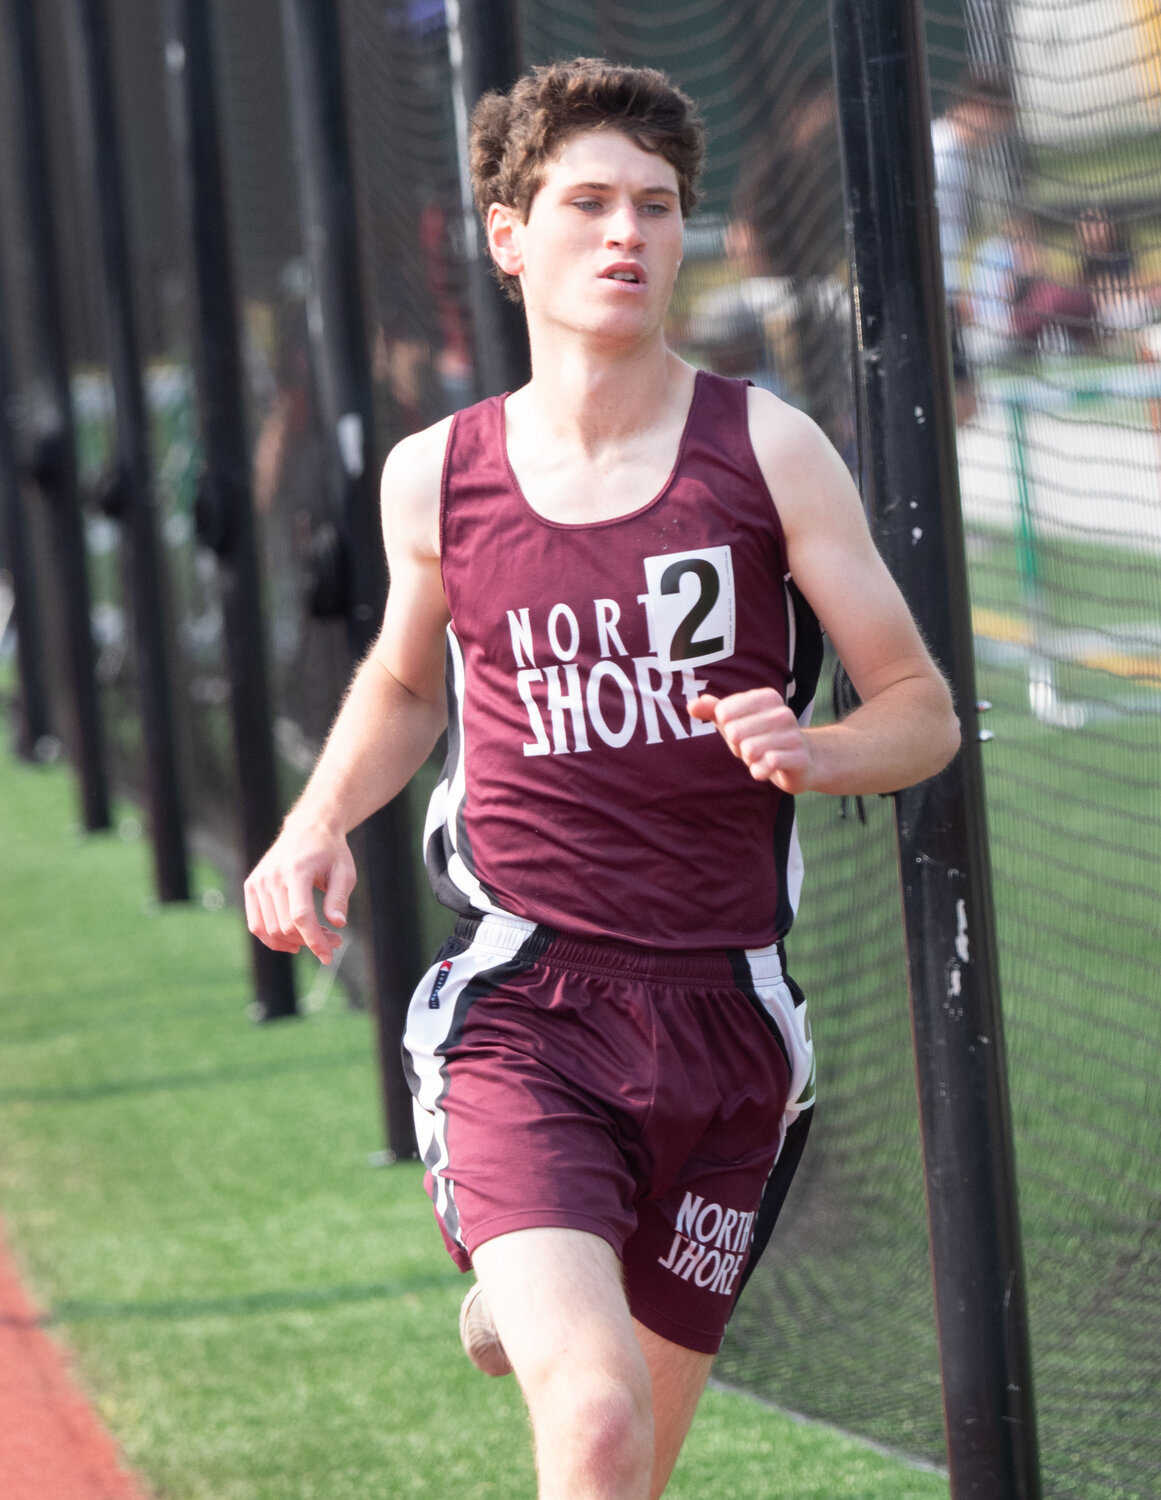 Samuel Sturge finished All-County in the 800- and 1600-meter runs to help the Vikings overtake West Hempstead for the Class A title.